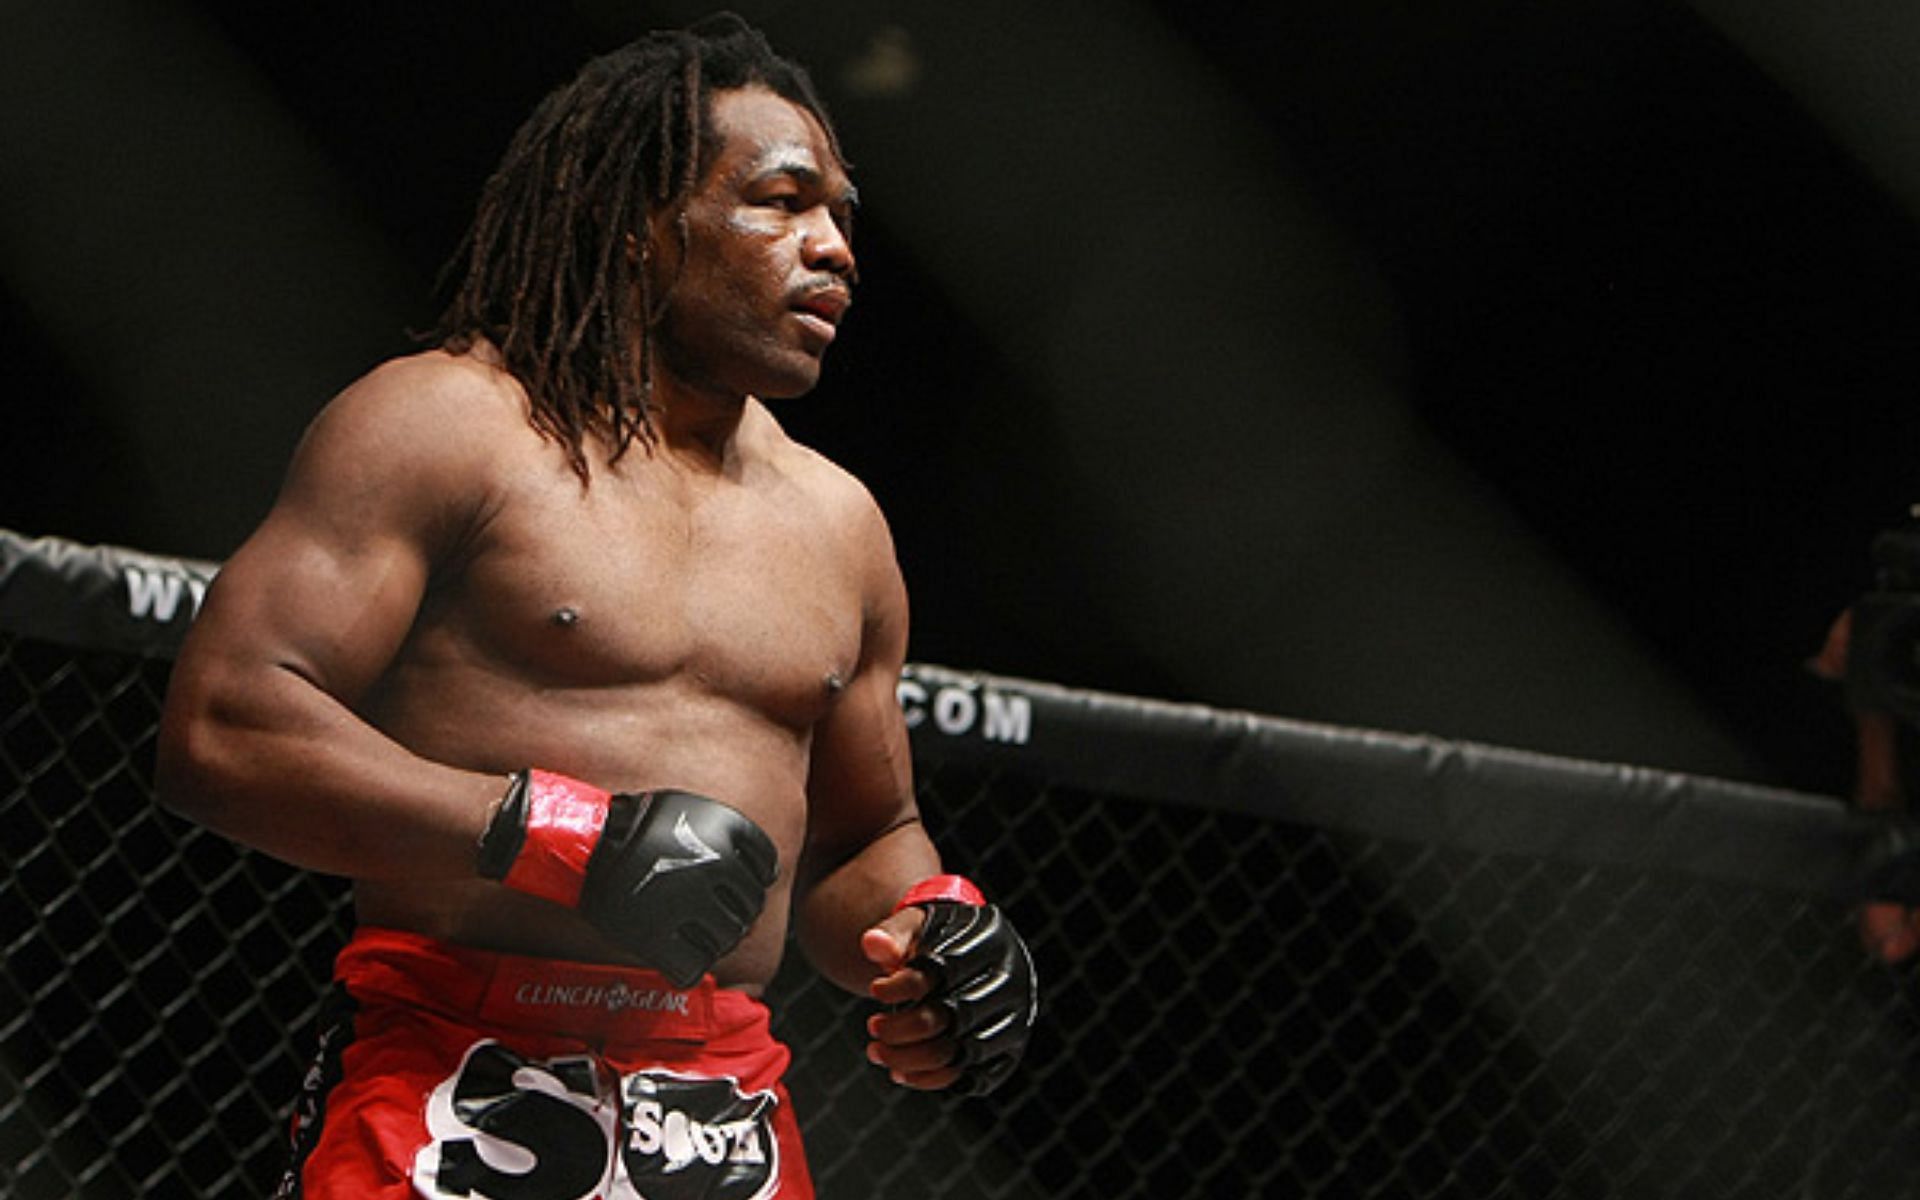 It was hard not to be disappointed by the octagon debut of Rameau Thierry Sokoudjou